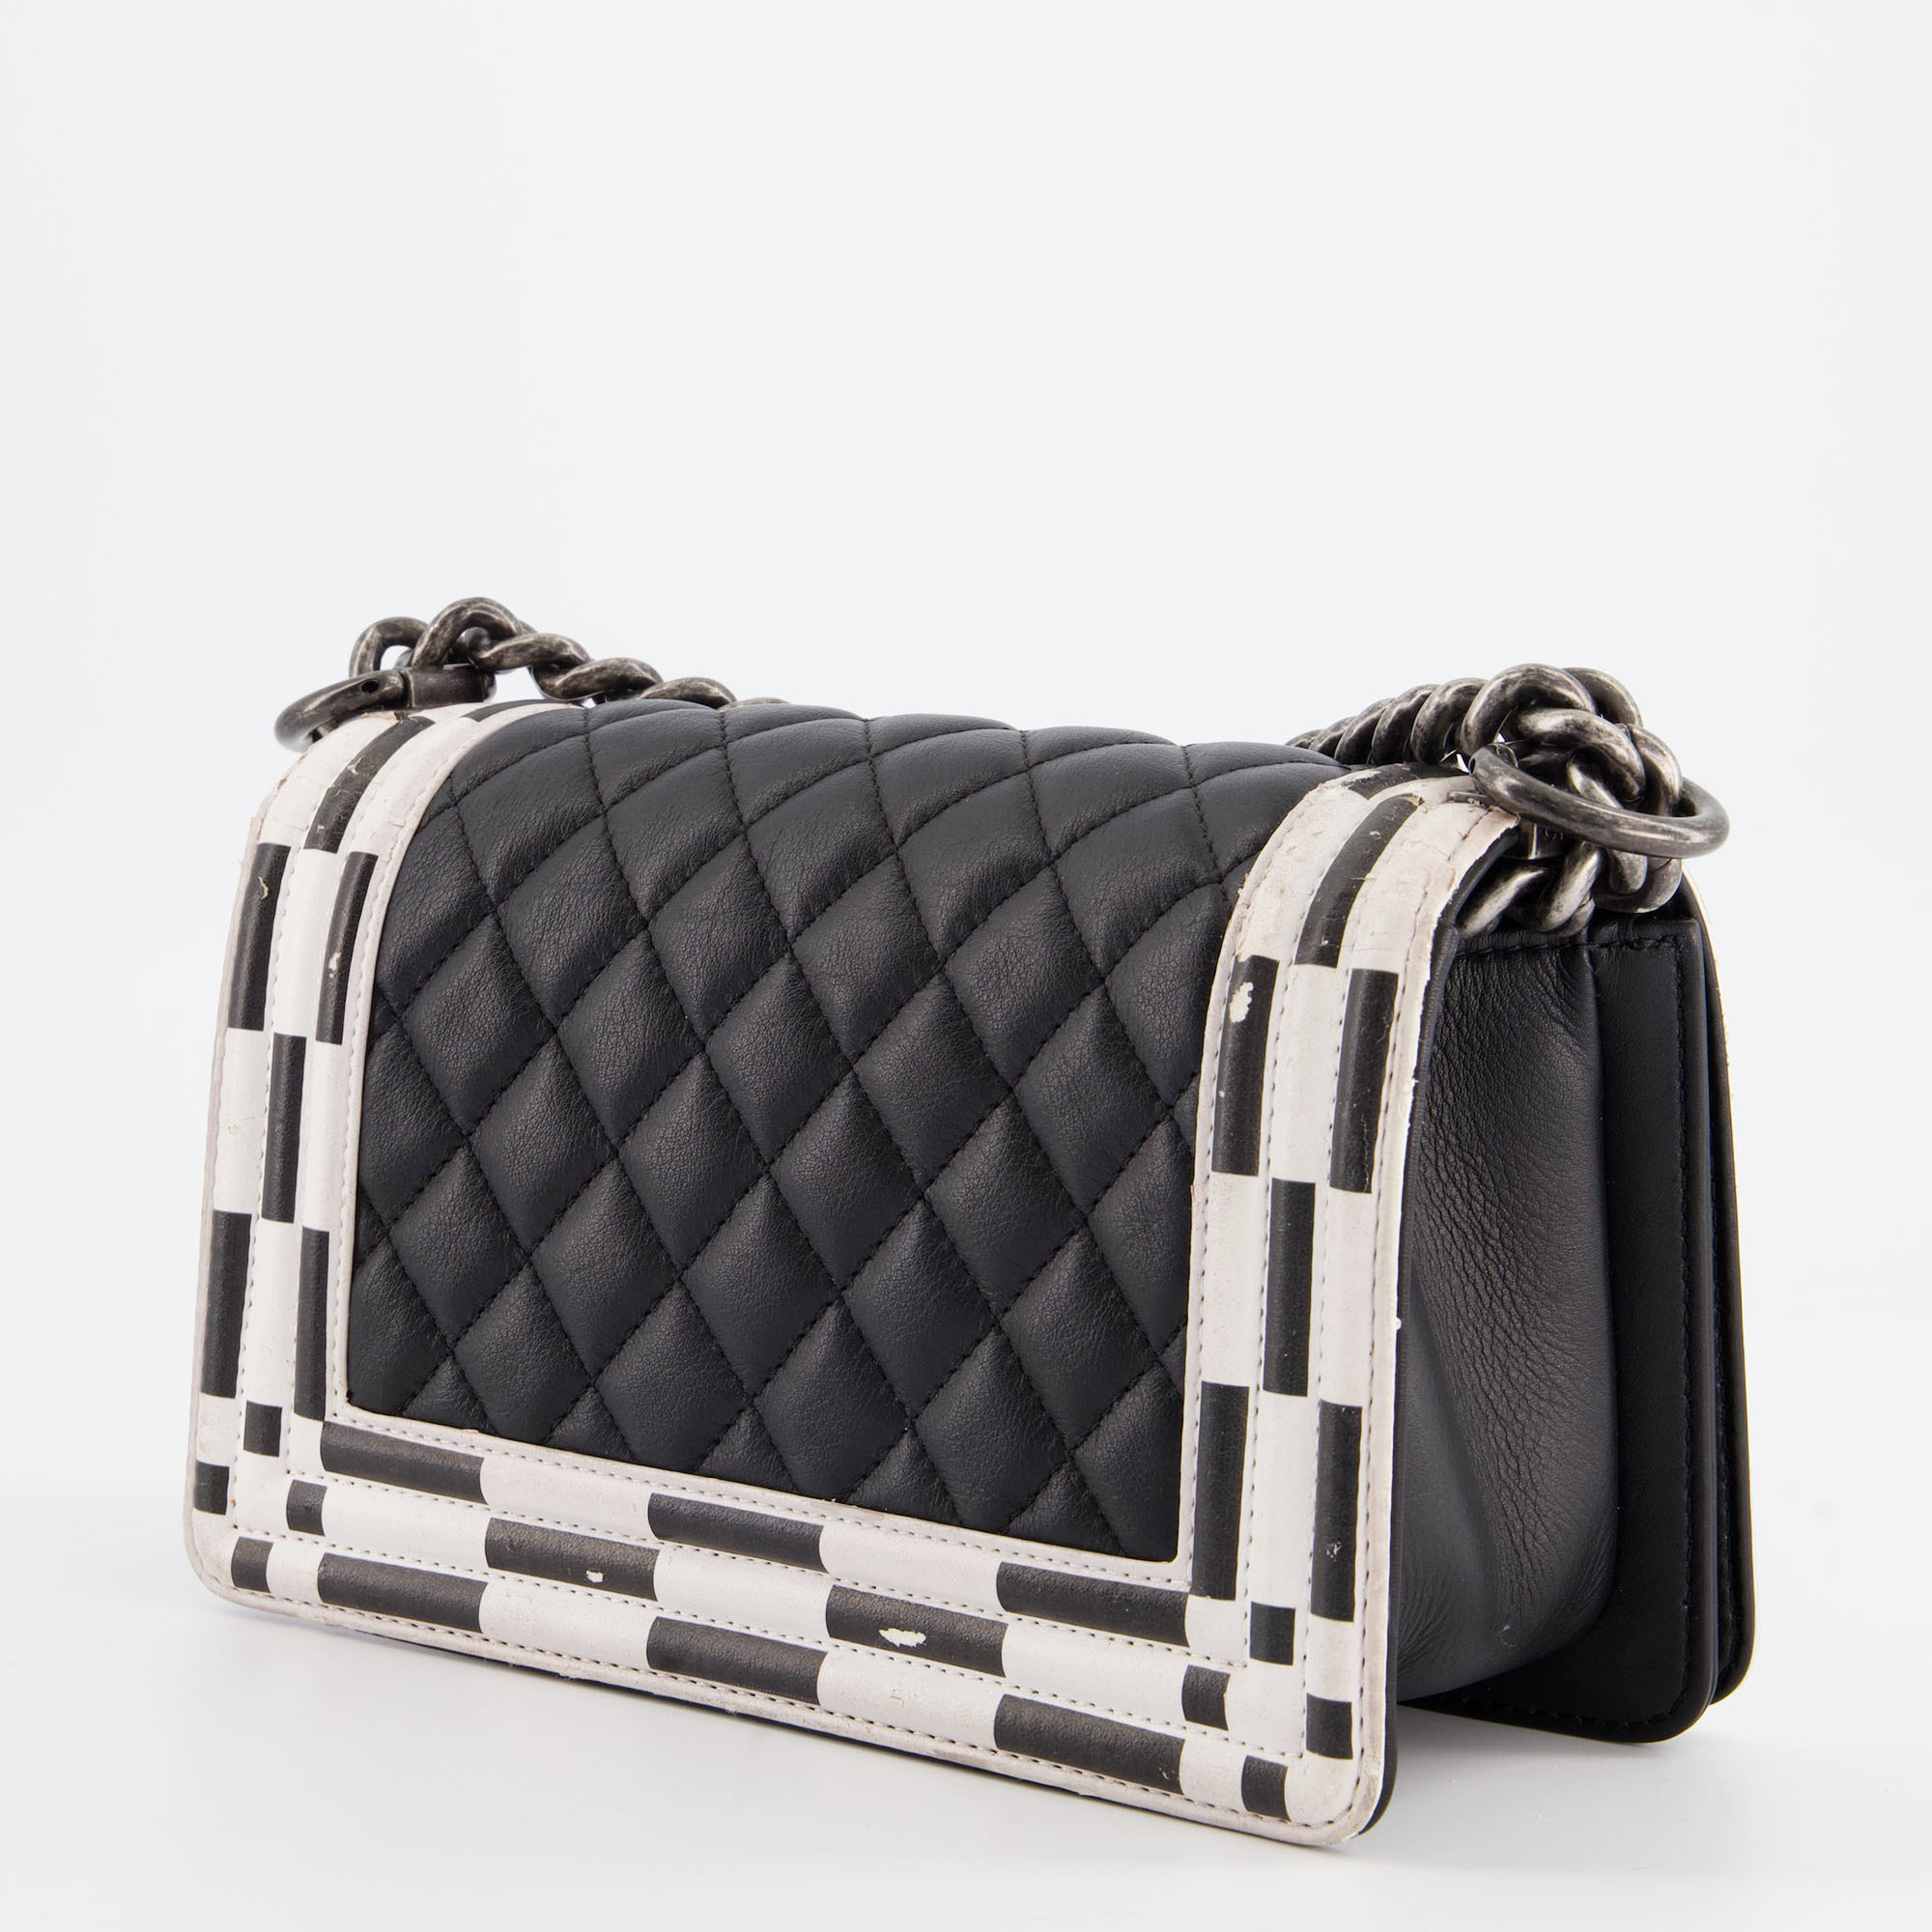 Chanel Black & White Small Boy Bag In Lambskin Leather With Ruthenium Hardware